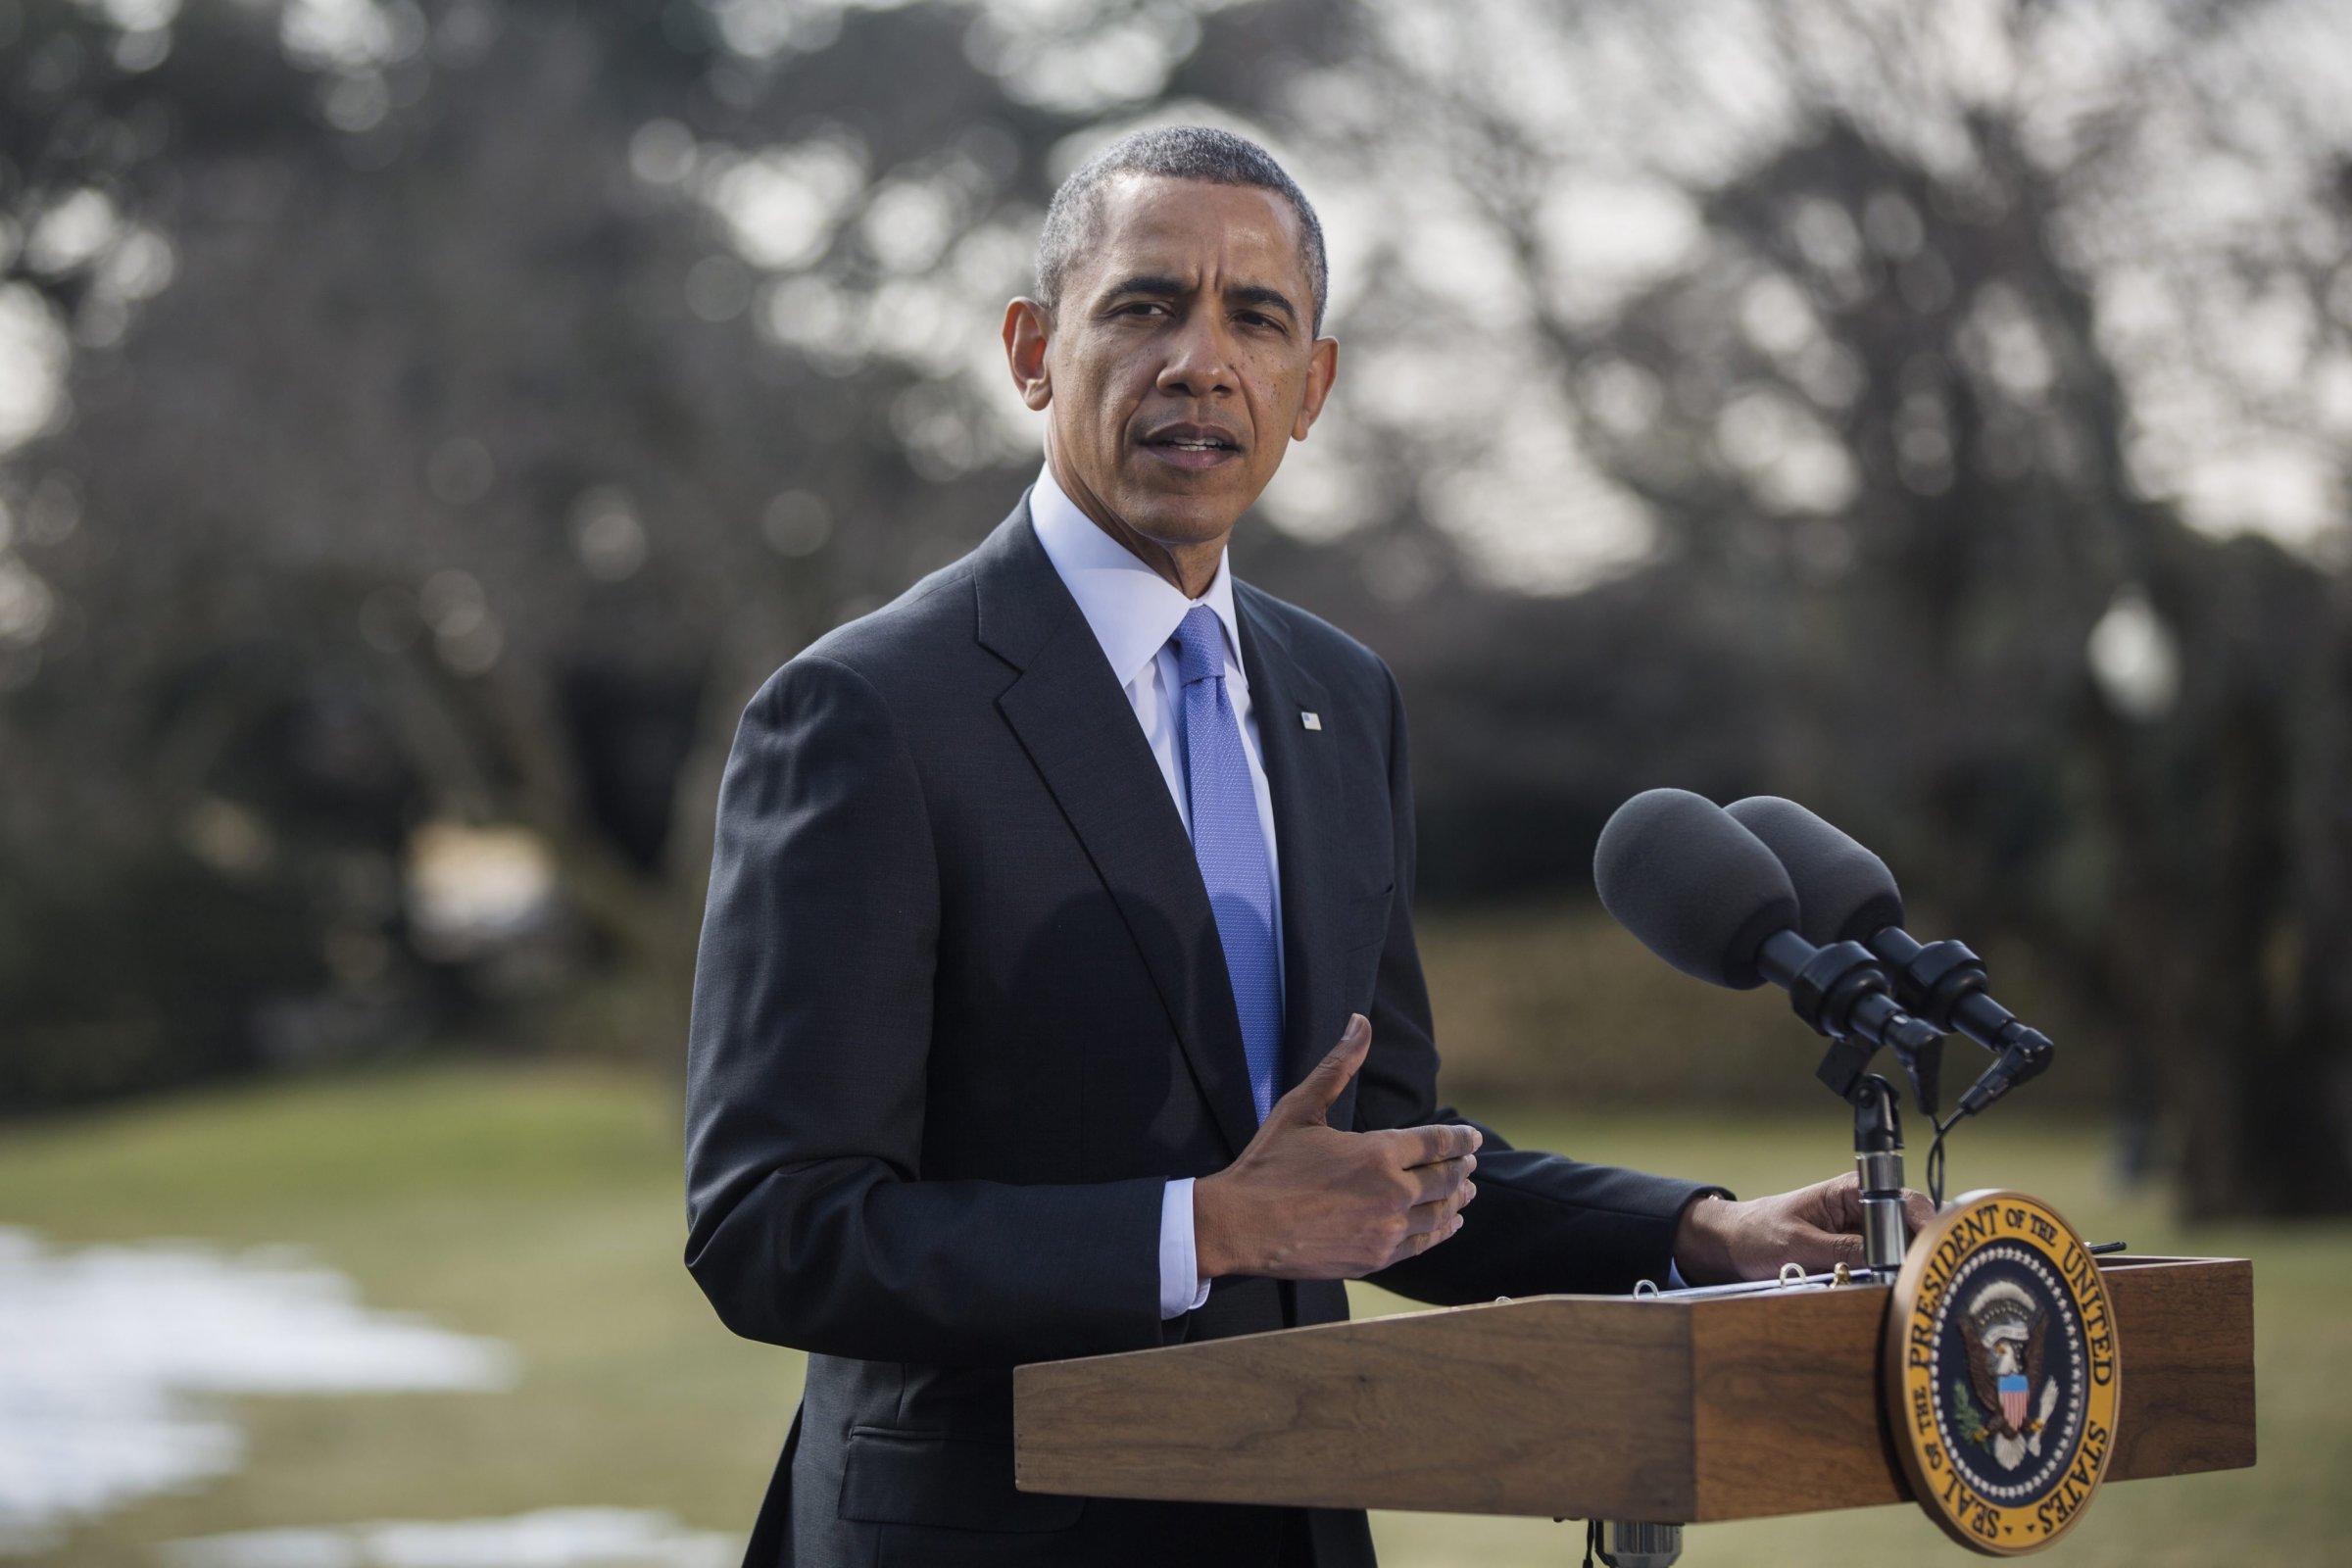 U.S. President Barack Obama announces additional sanctions against Russia on the South Lawn of the White House in Washington, D.C., on March 20, 2014.